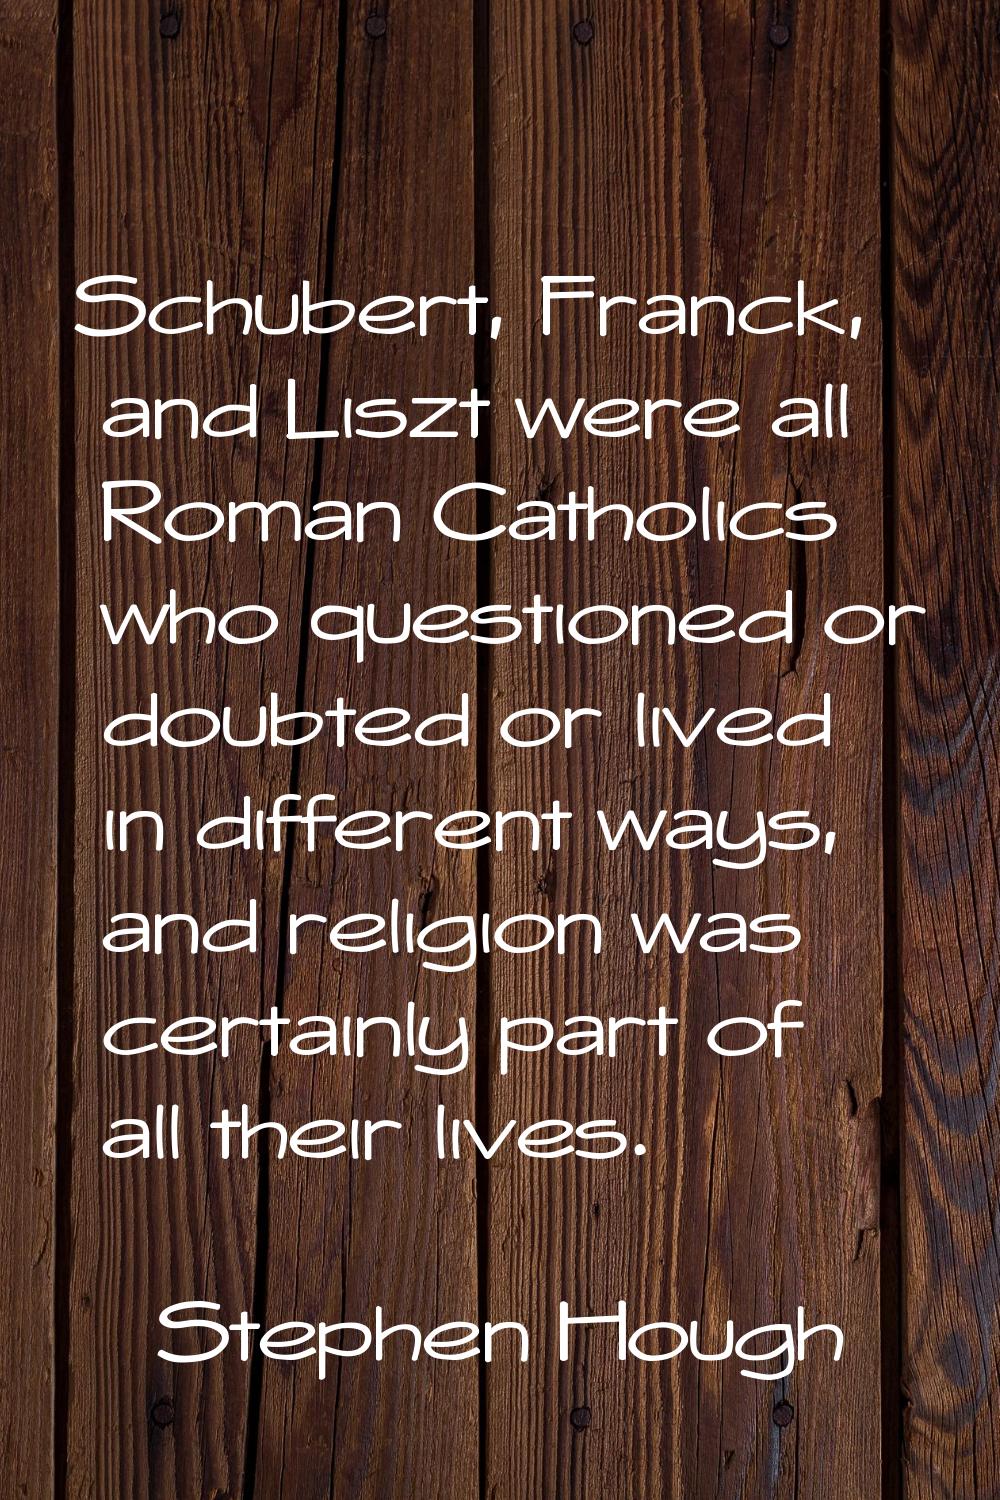 Schubert, Franck, and Liszt were all Roman Catholics who questioned or doubted or lived in differen